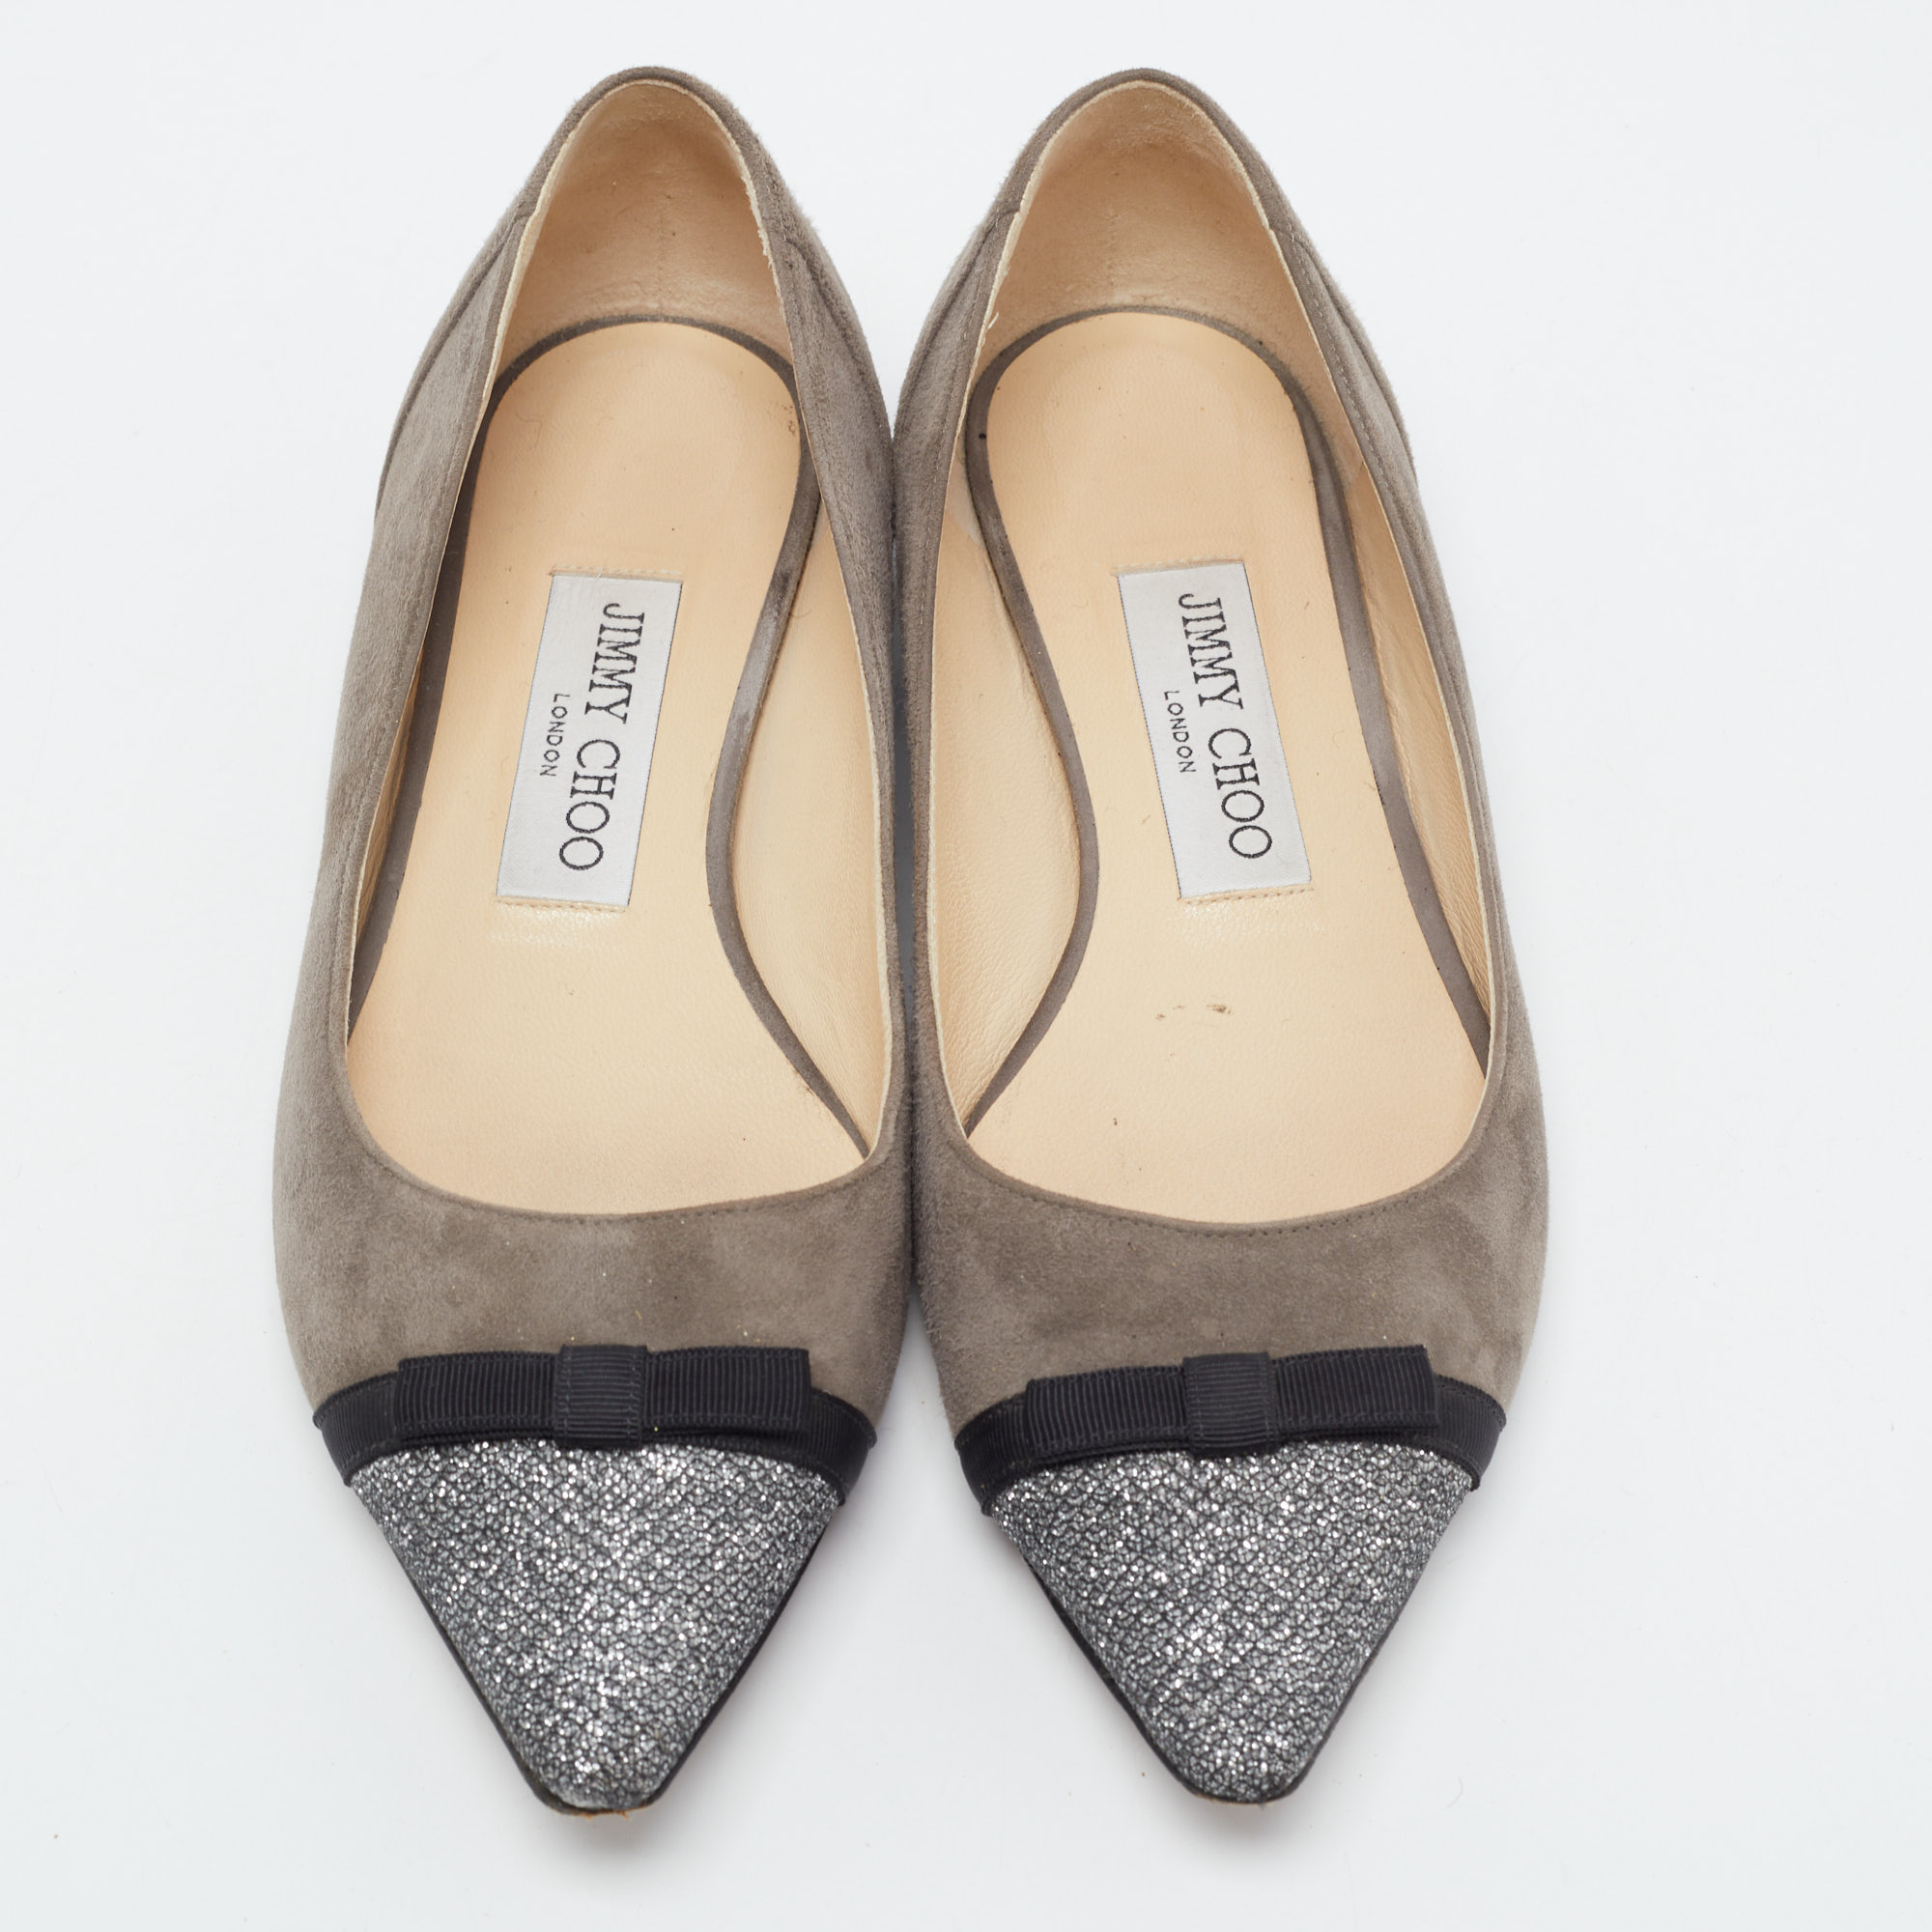 Jimmy Choo Dark Grey Suede And Glitter Bow Ballet Flats Size 35.5